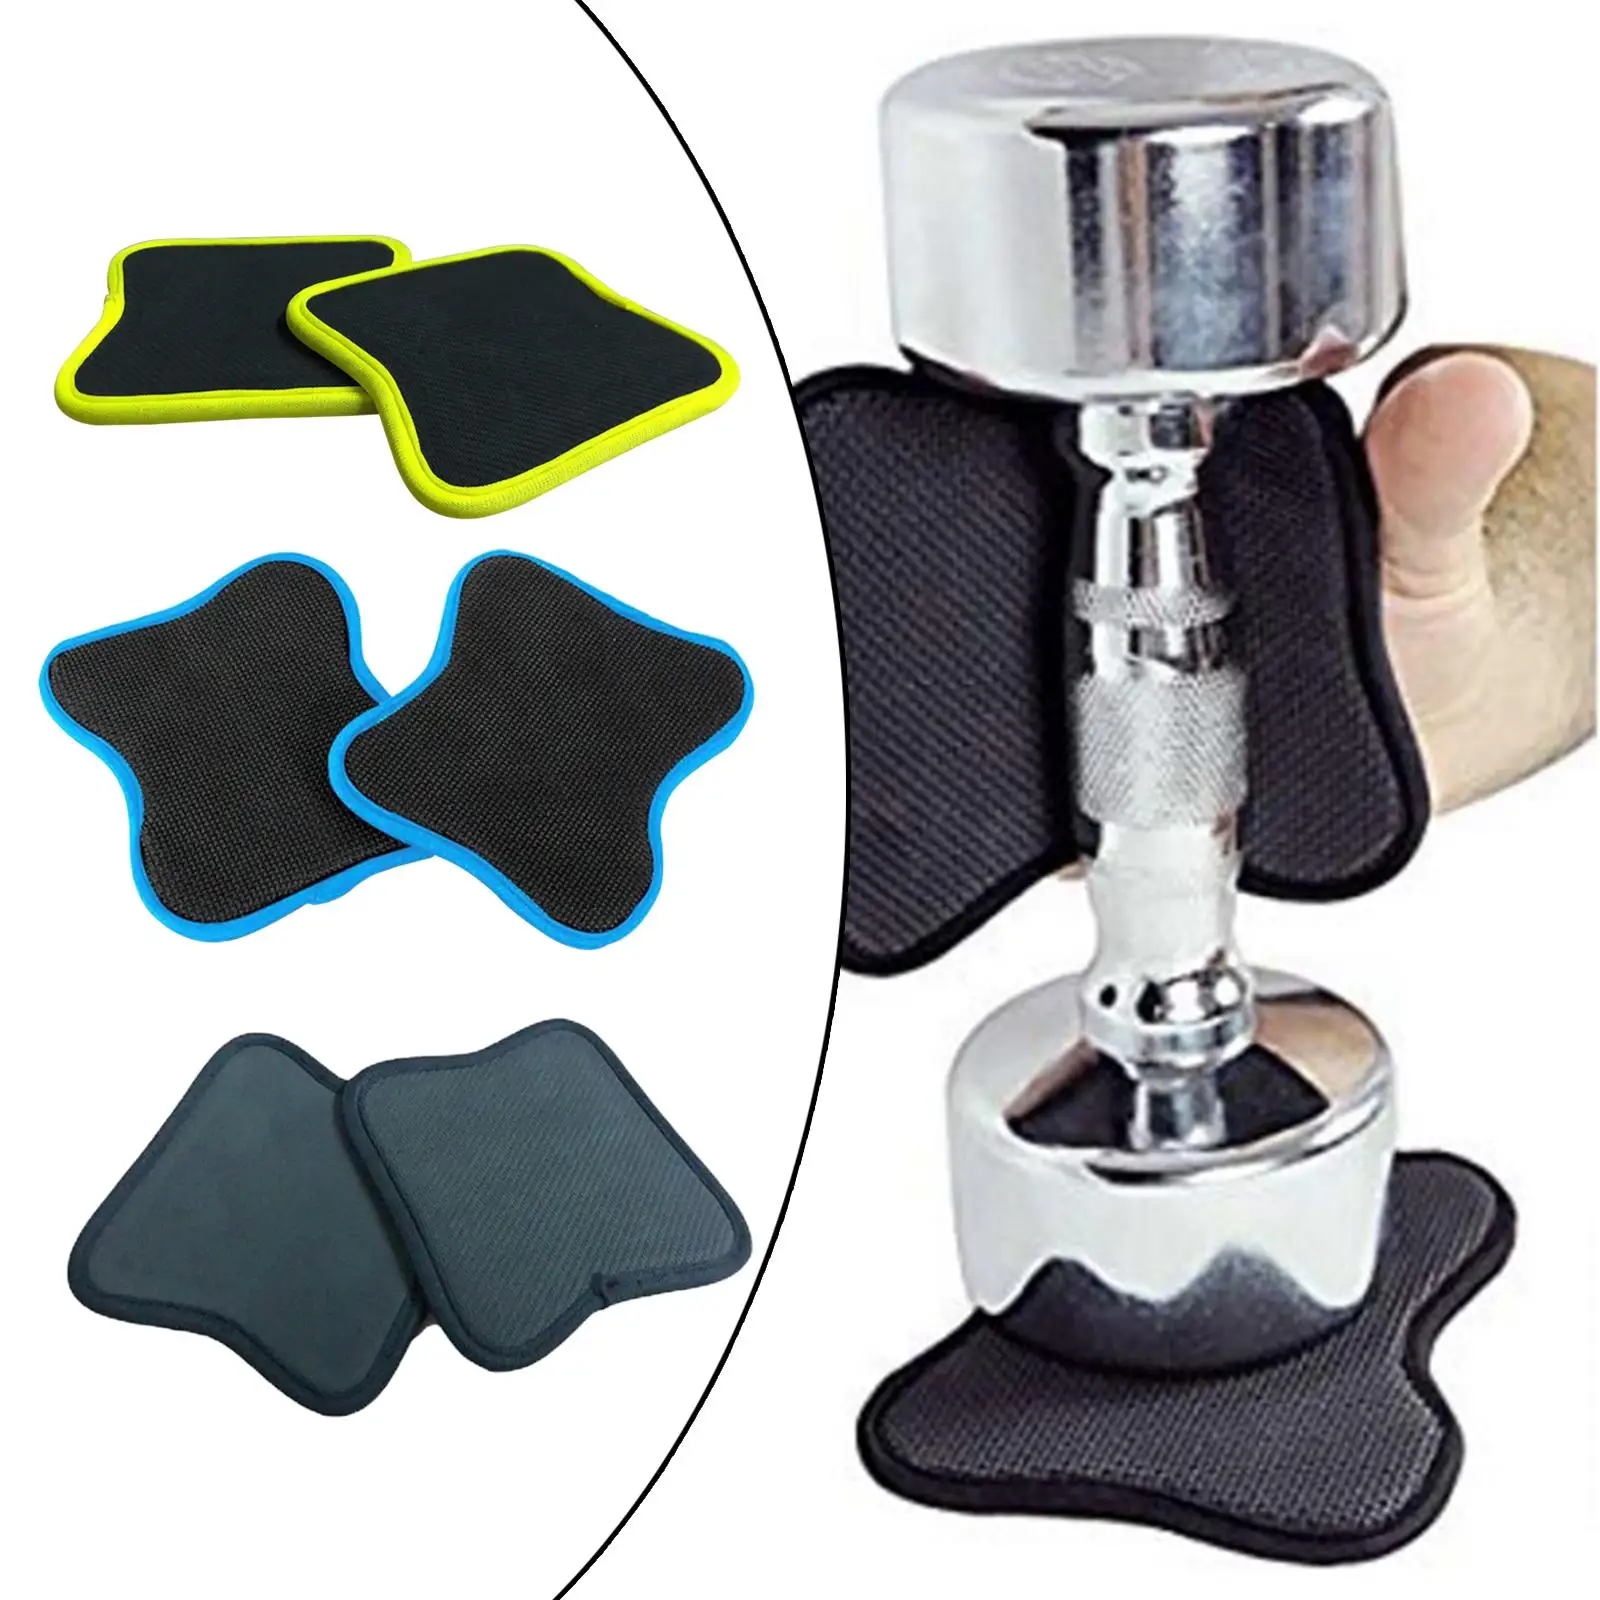 Weight Lifting Grips Gloves Women Men Comfortable Non  for Dumbbell Training Sports in The Gym